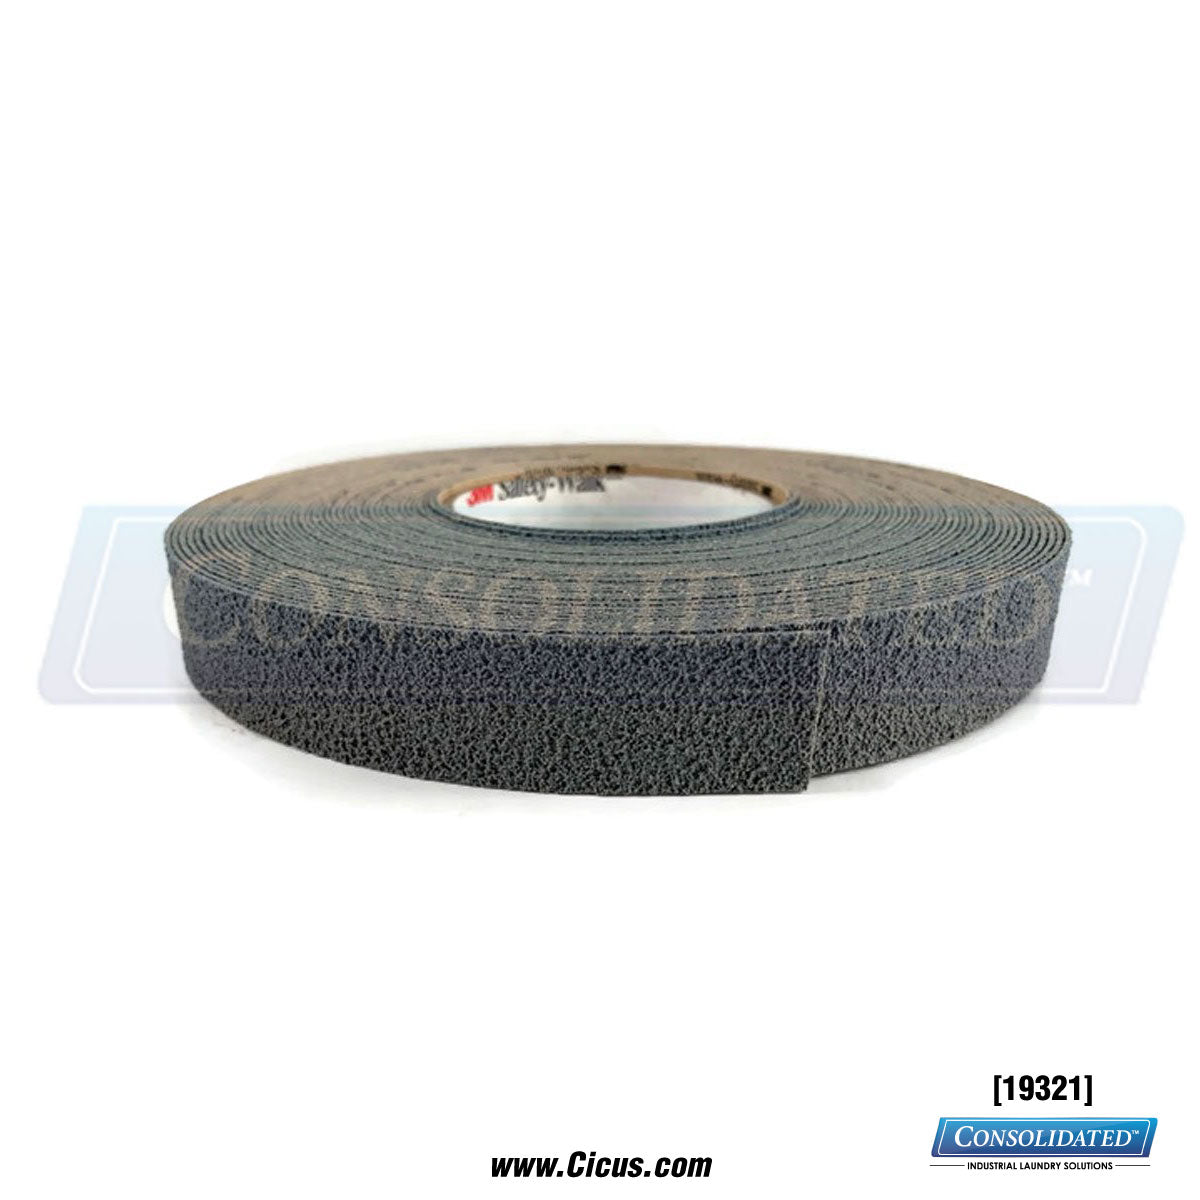 3M Grey 1 Inch Tracking Tape - 60 Foot Roll [19321]